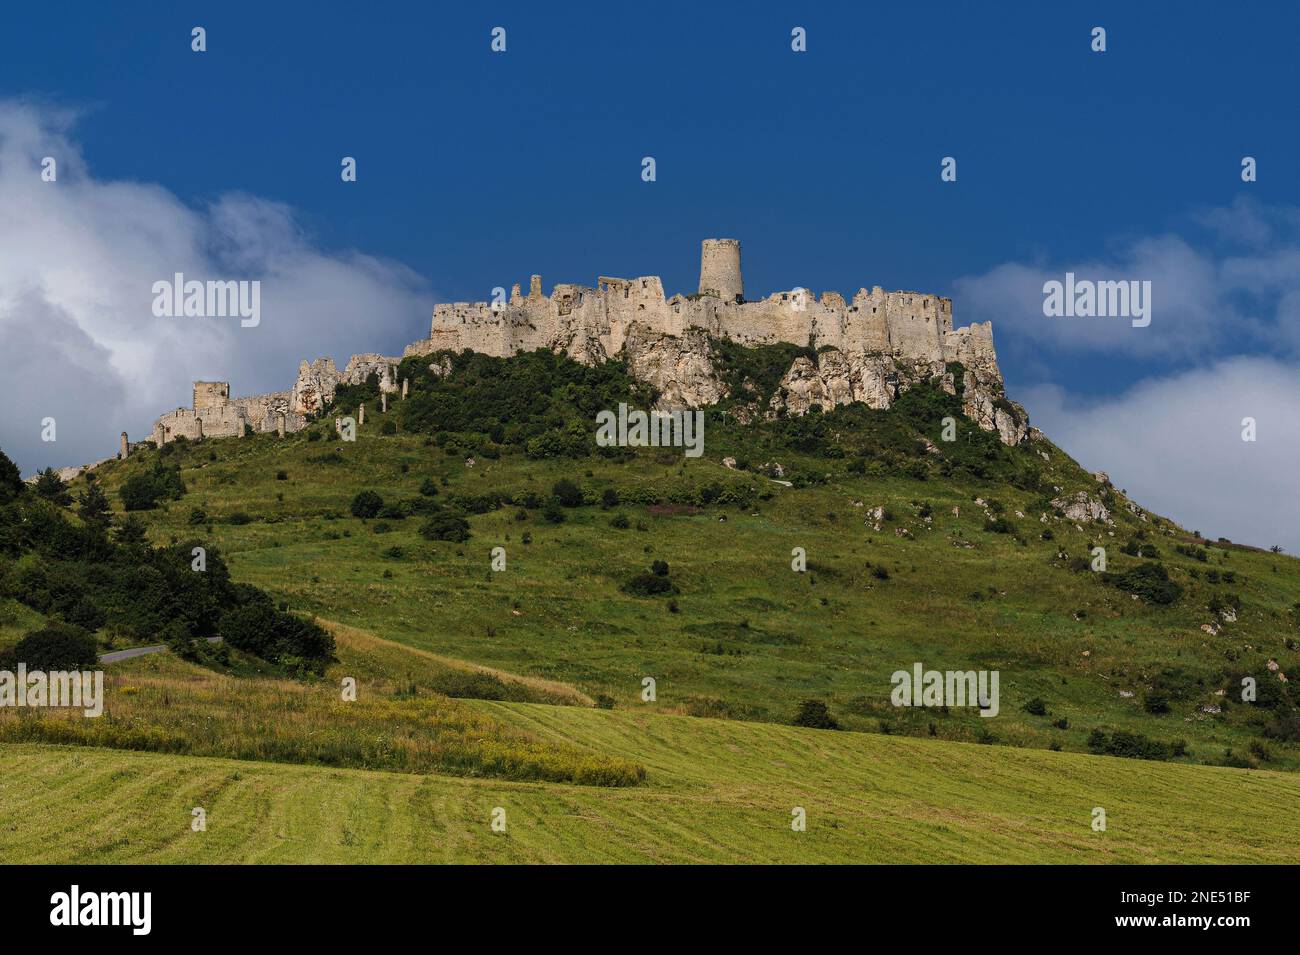 Spiš Castle, a mighty medieval fortress built by Hungarian kings, stands on a 200m-high limestone spur in the Košice Region of eastern Slovakia.  Standing stone columns descending the slope to the left were once connected by baulks of timber to form a first line of defence against attackers seeking to assault the main gate, which was further protected by a deep ditch and a high wall. Stock Photo